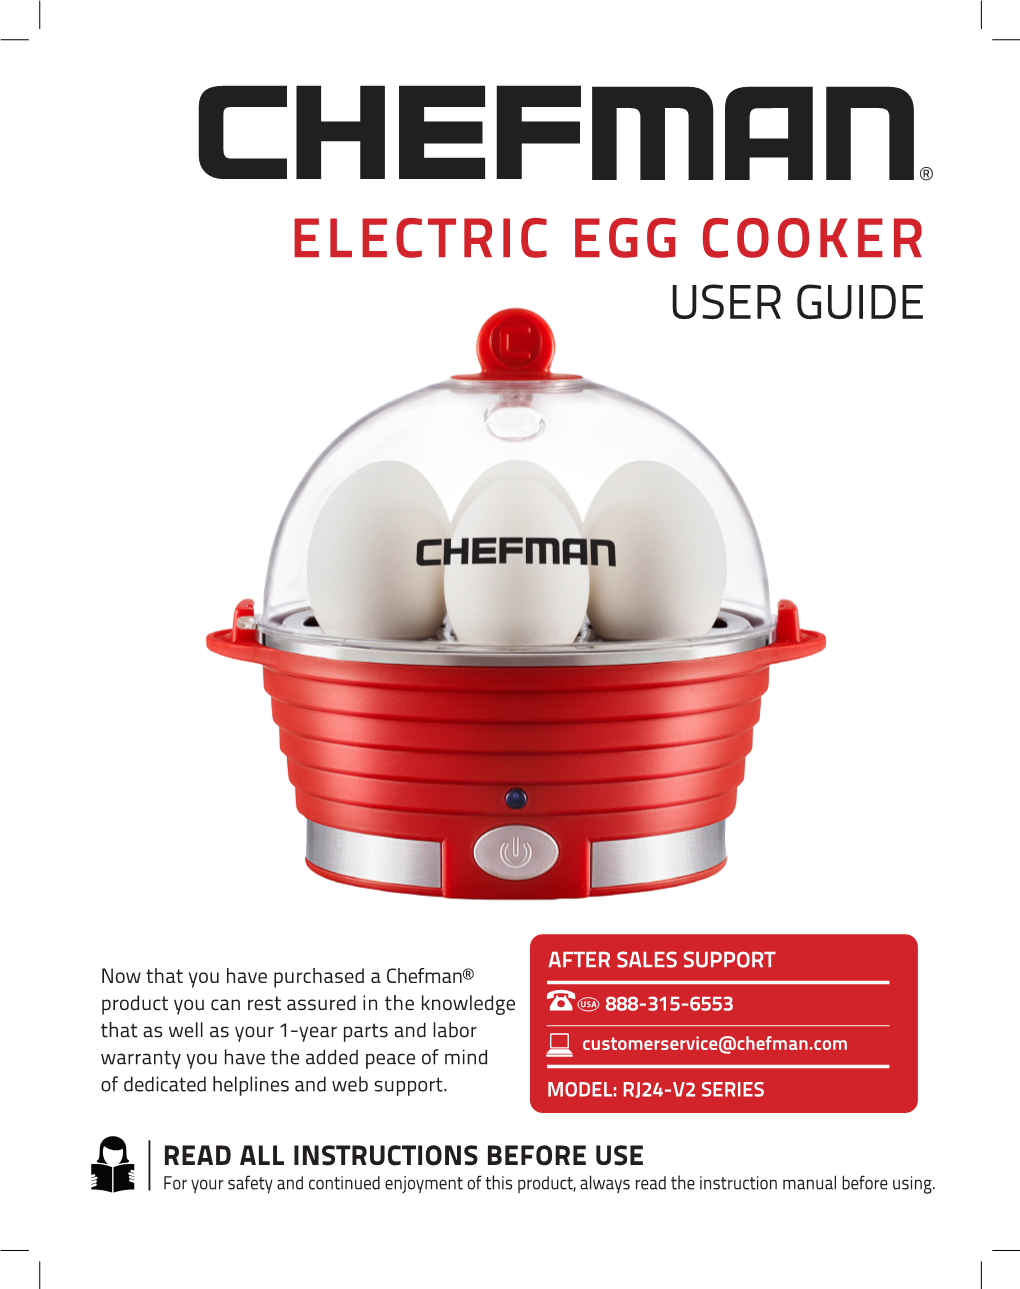 Electric Egg Cooker User Guide